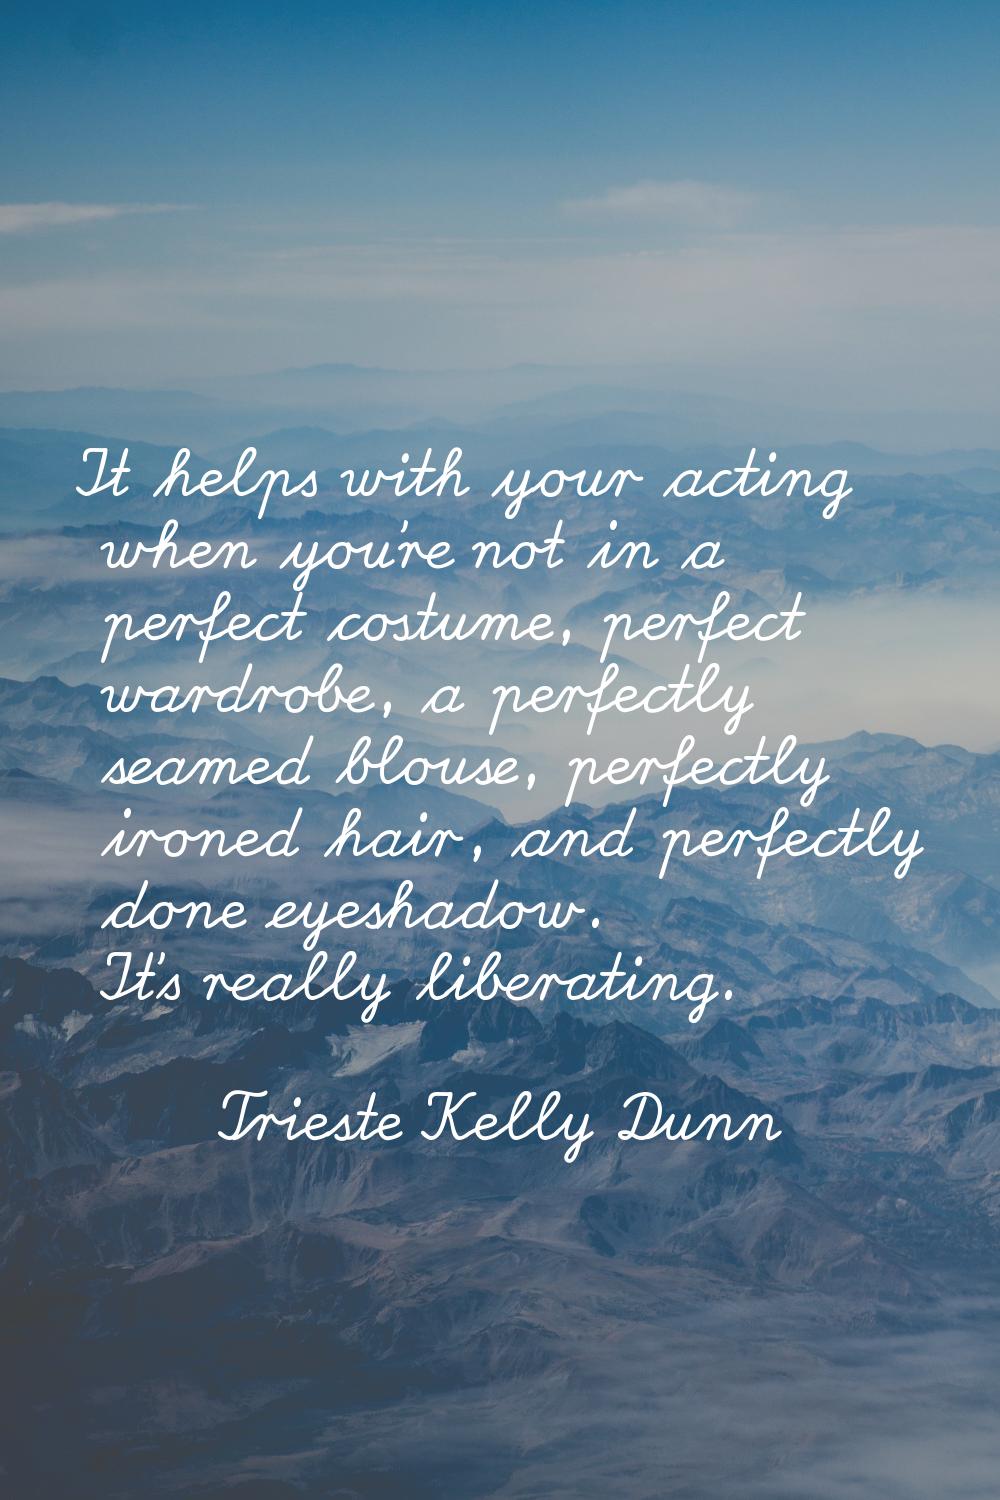 It helps with your acting when you're not in a perfect costume, perfect wardrobe, a perfectly seame